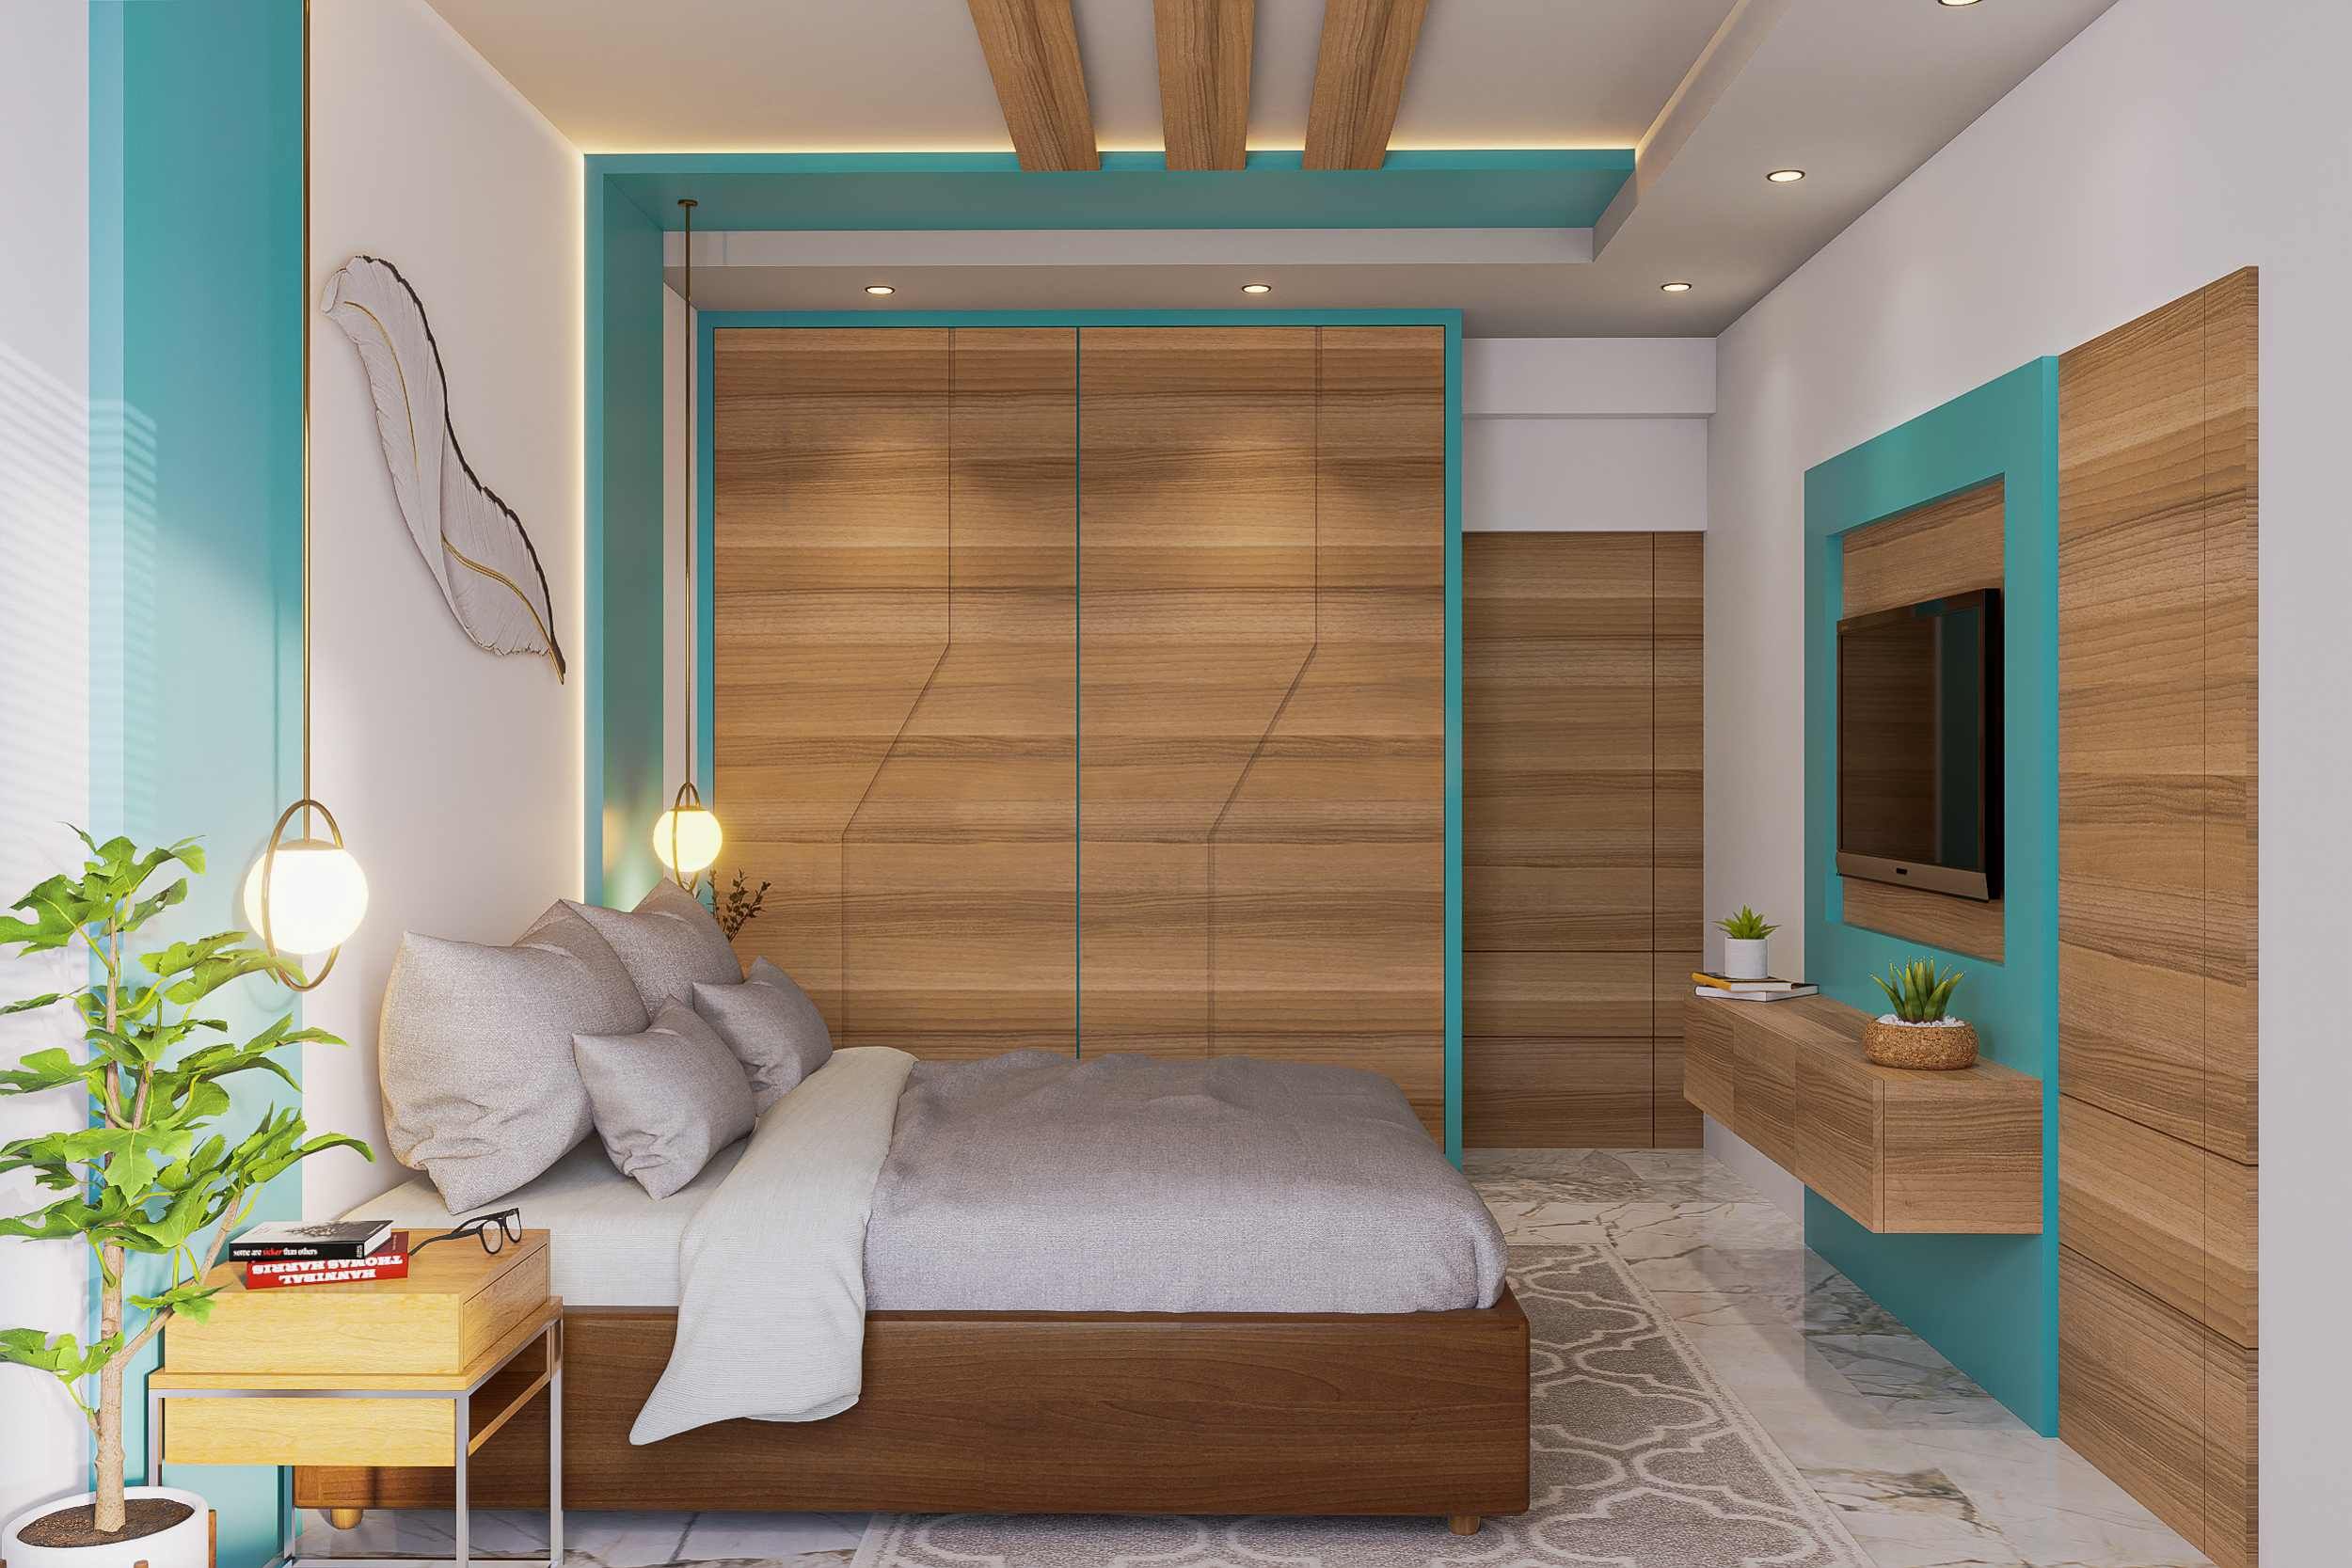 Modern Bedroom Design With Wooden Bed And Wardrobe